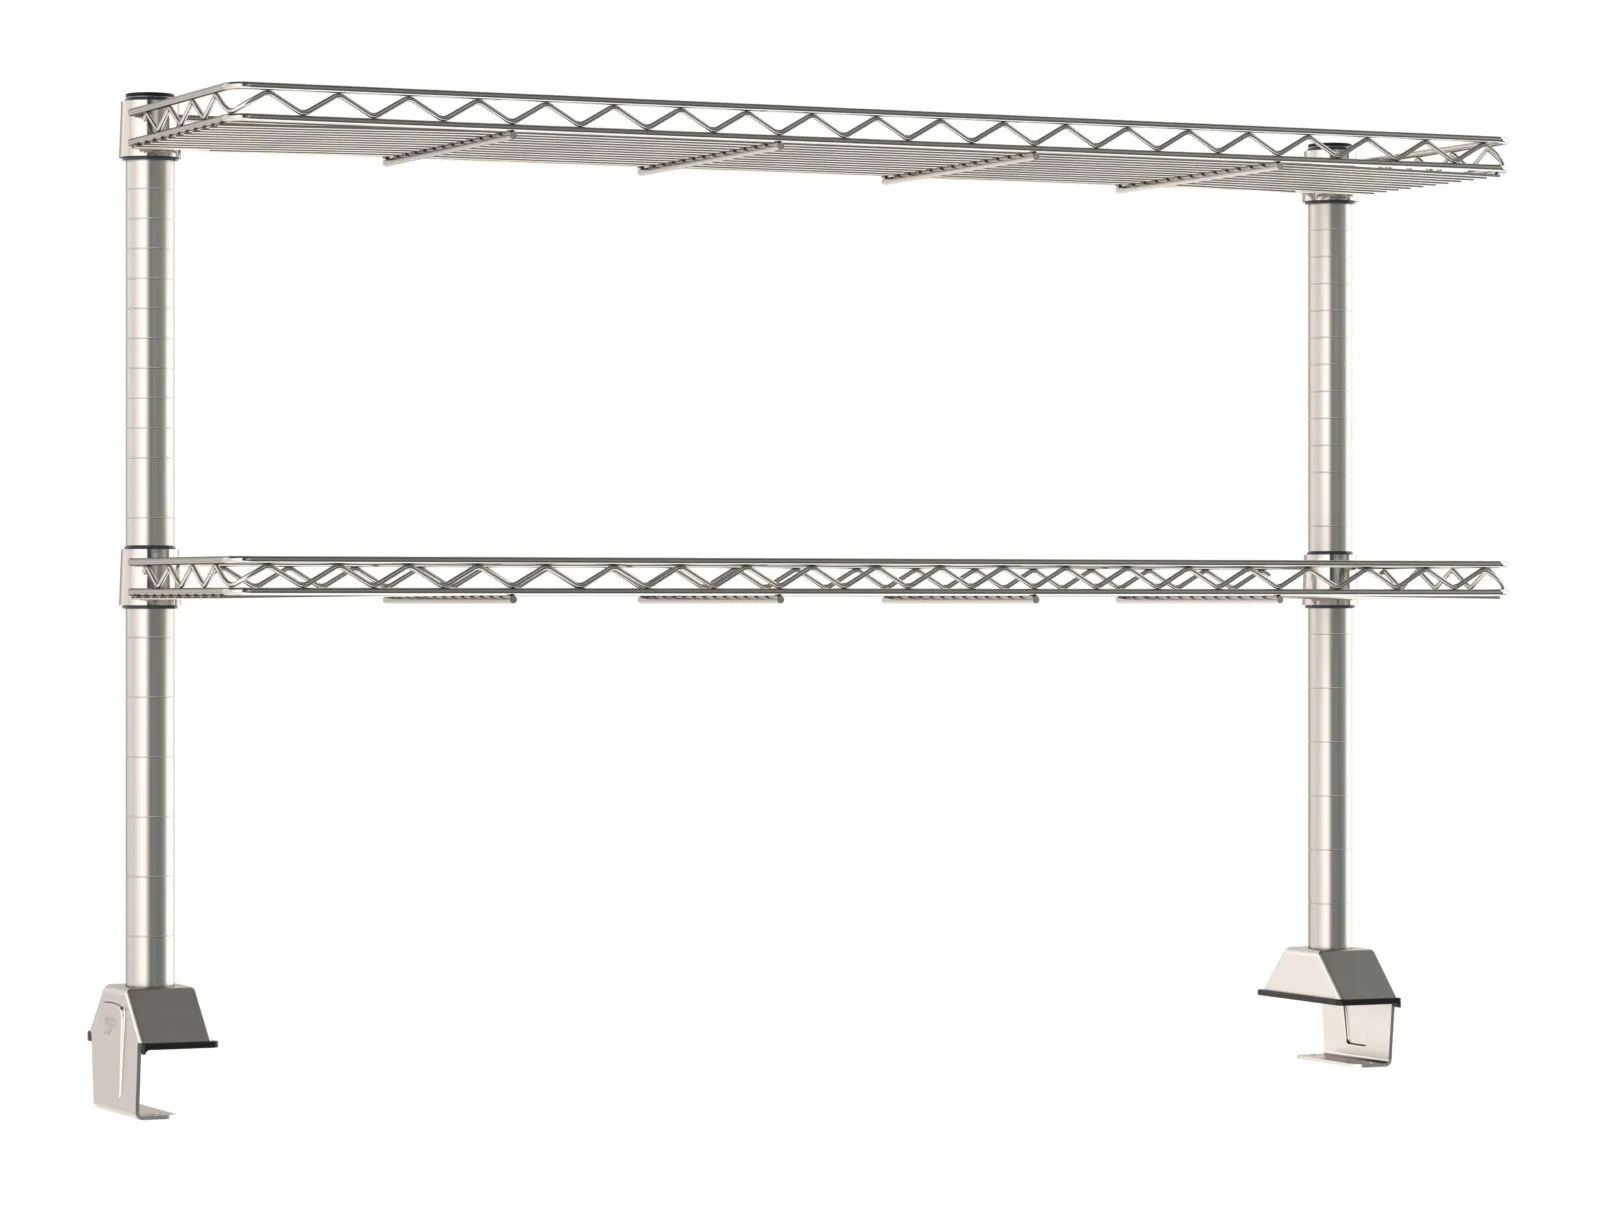 Stainless Steel Metro Tableworx 2 Rear Cantilever Stainless Steel Wire Shelf Risers